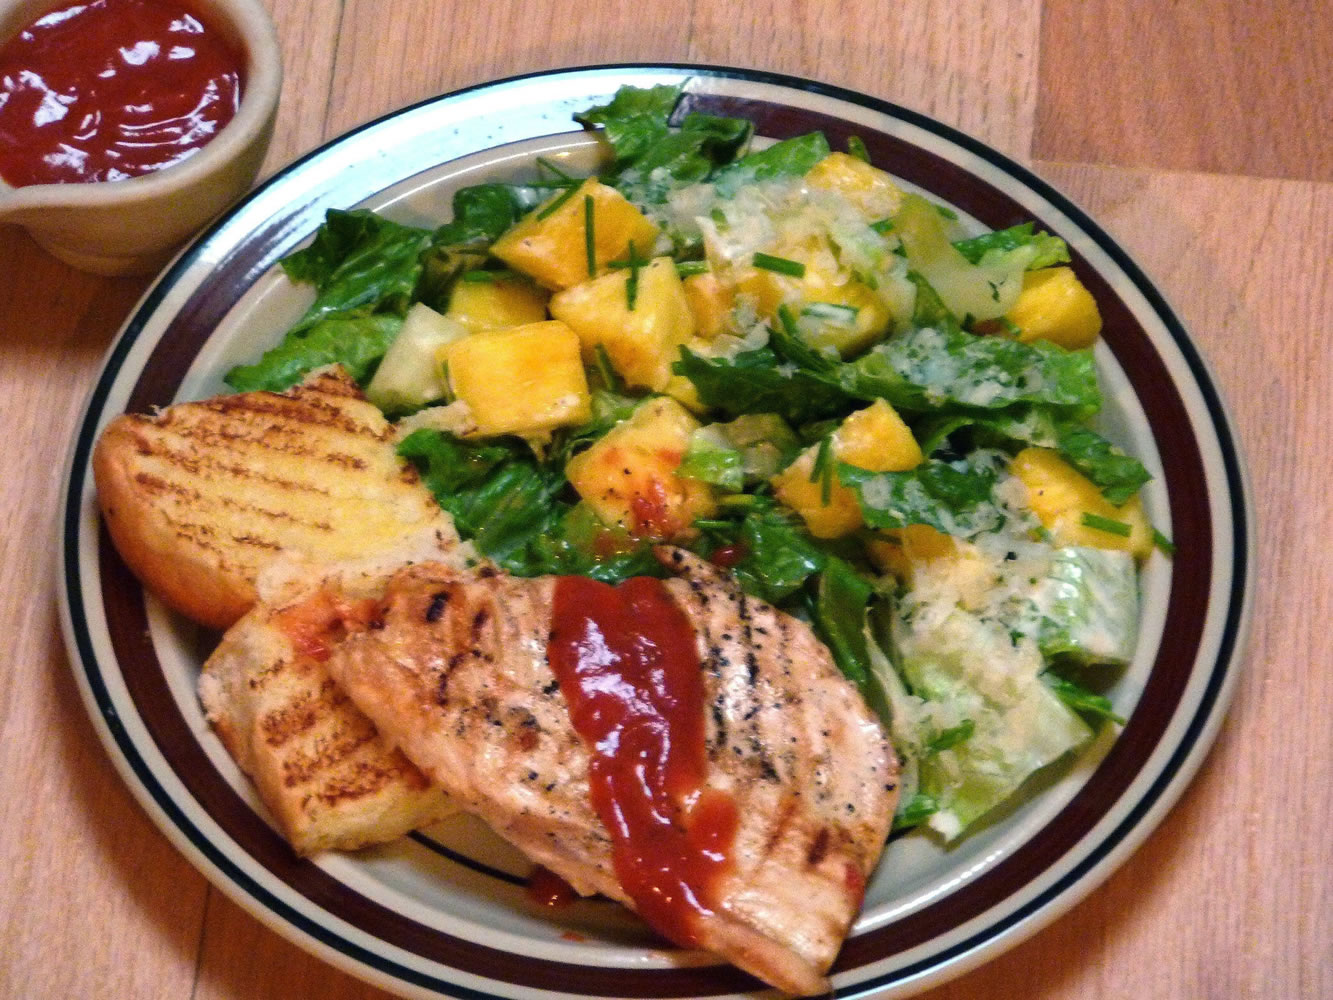 Hawaiian barbecued chicken is served with pineapple Caesar salad.